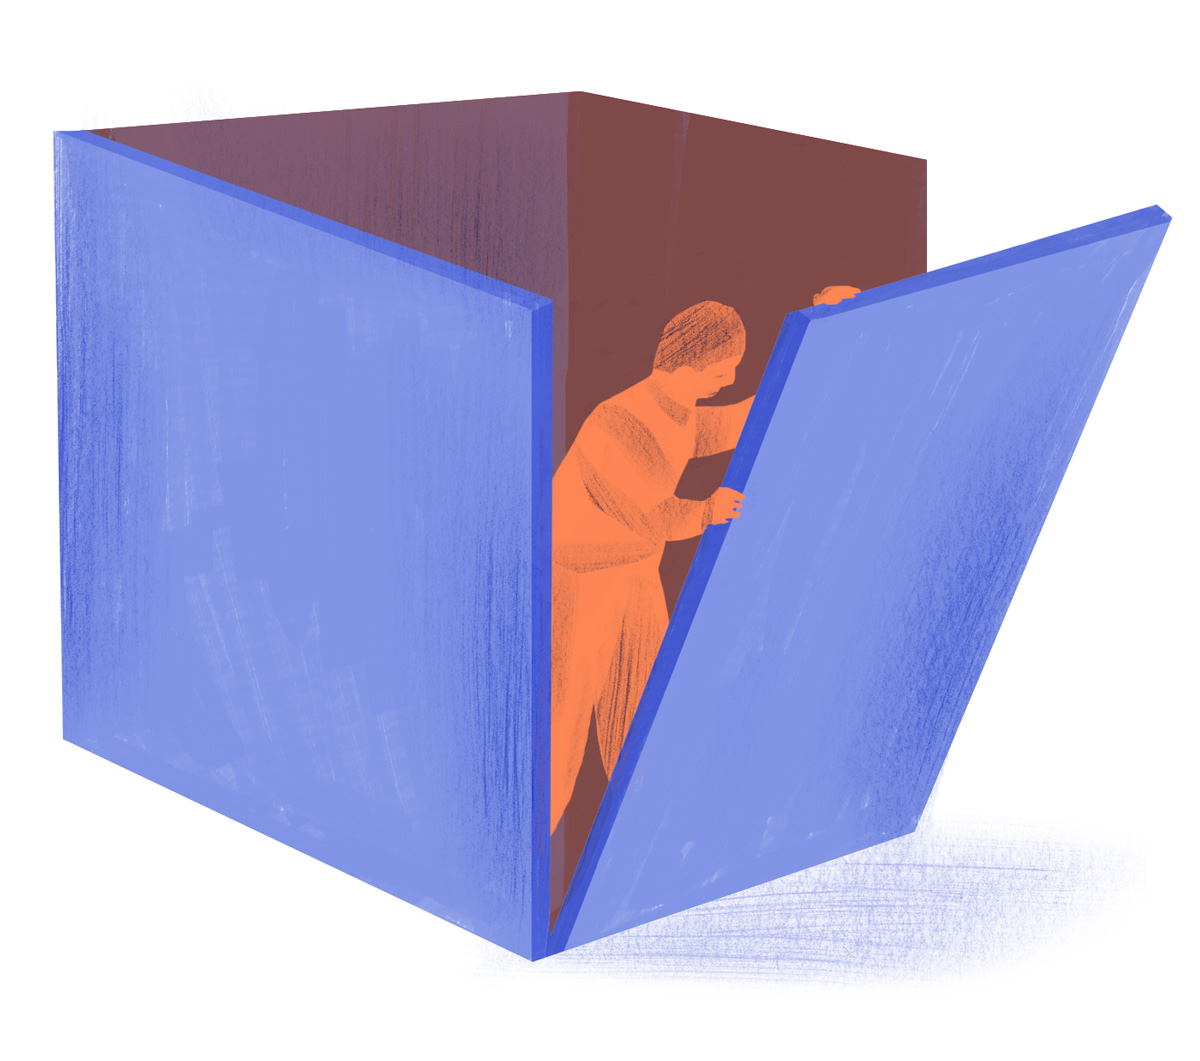 Orange and purple Illustration of a man pushing his way out of a box